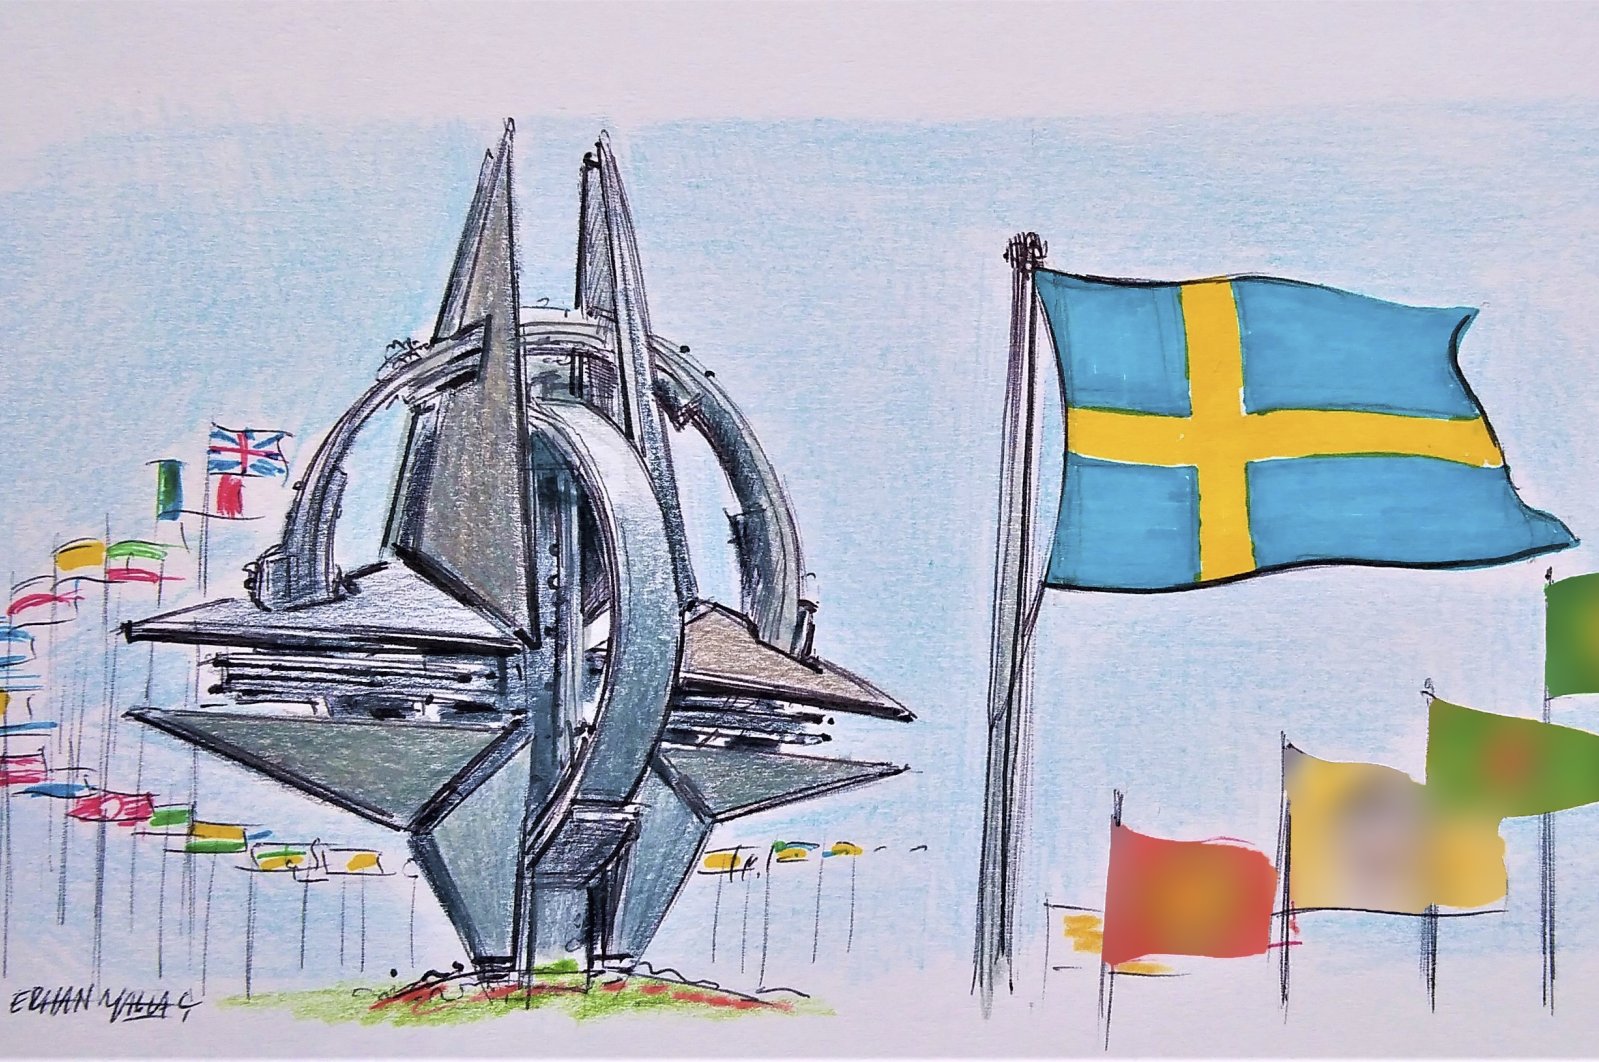 Sweden and Finland suddenly grasped how necessary NATO membership was and applied for accession last year, 70 years after the establishment of the alliance. (Erhan Yalvaç Illustration)